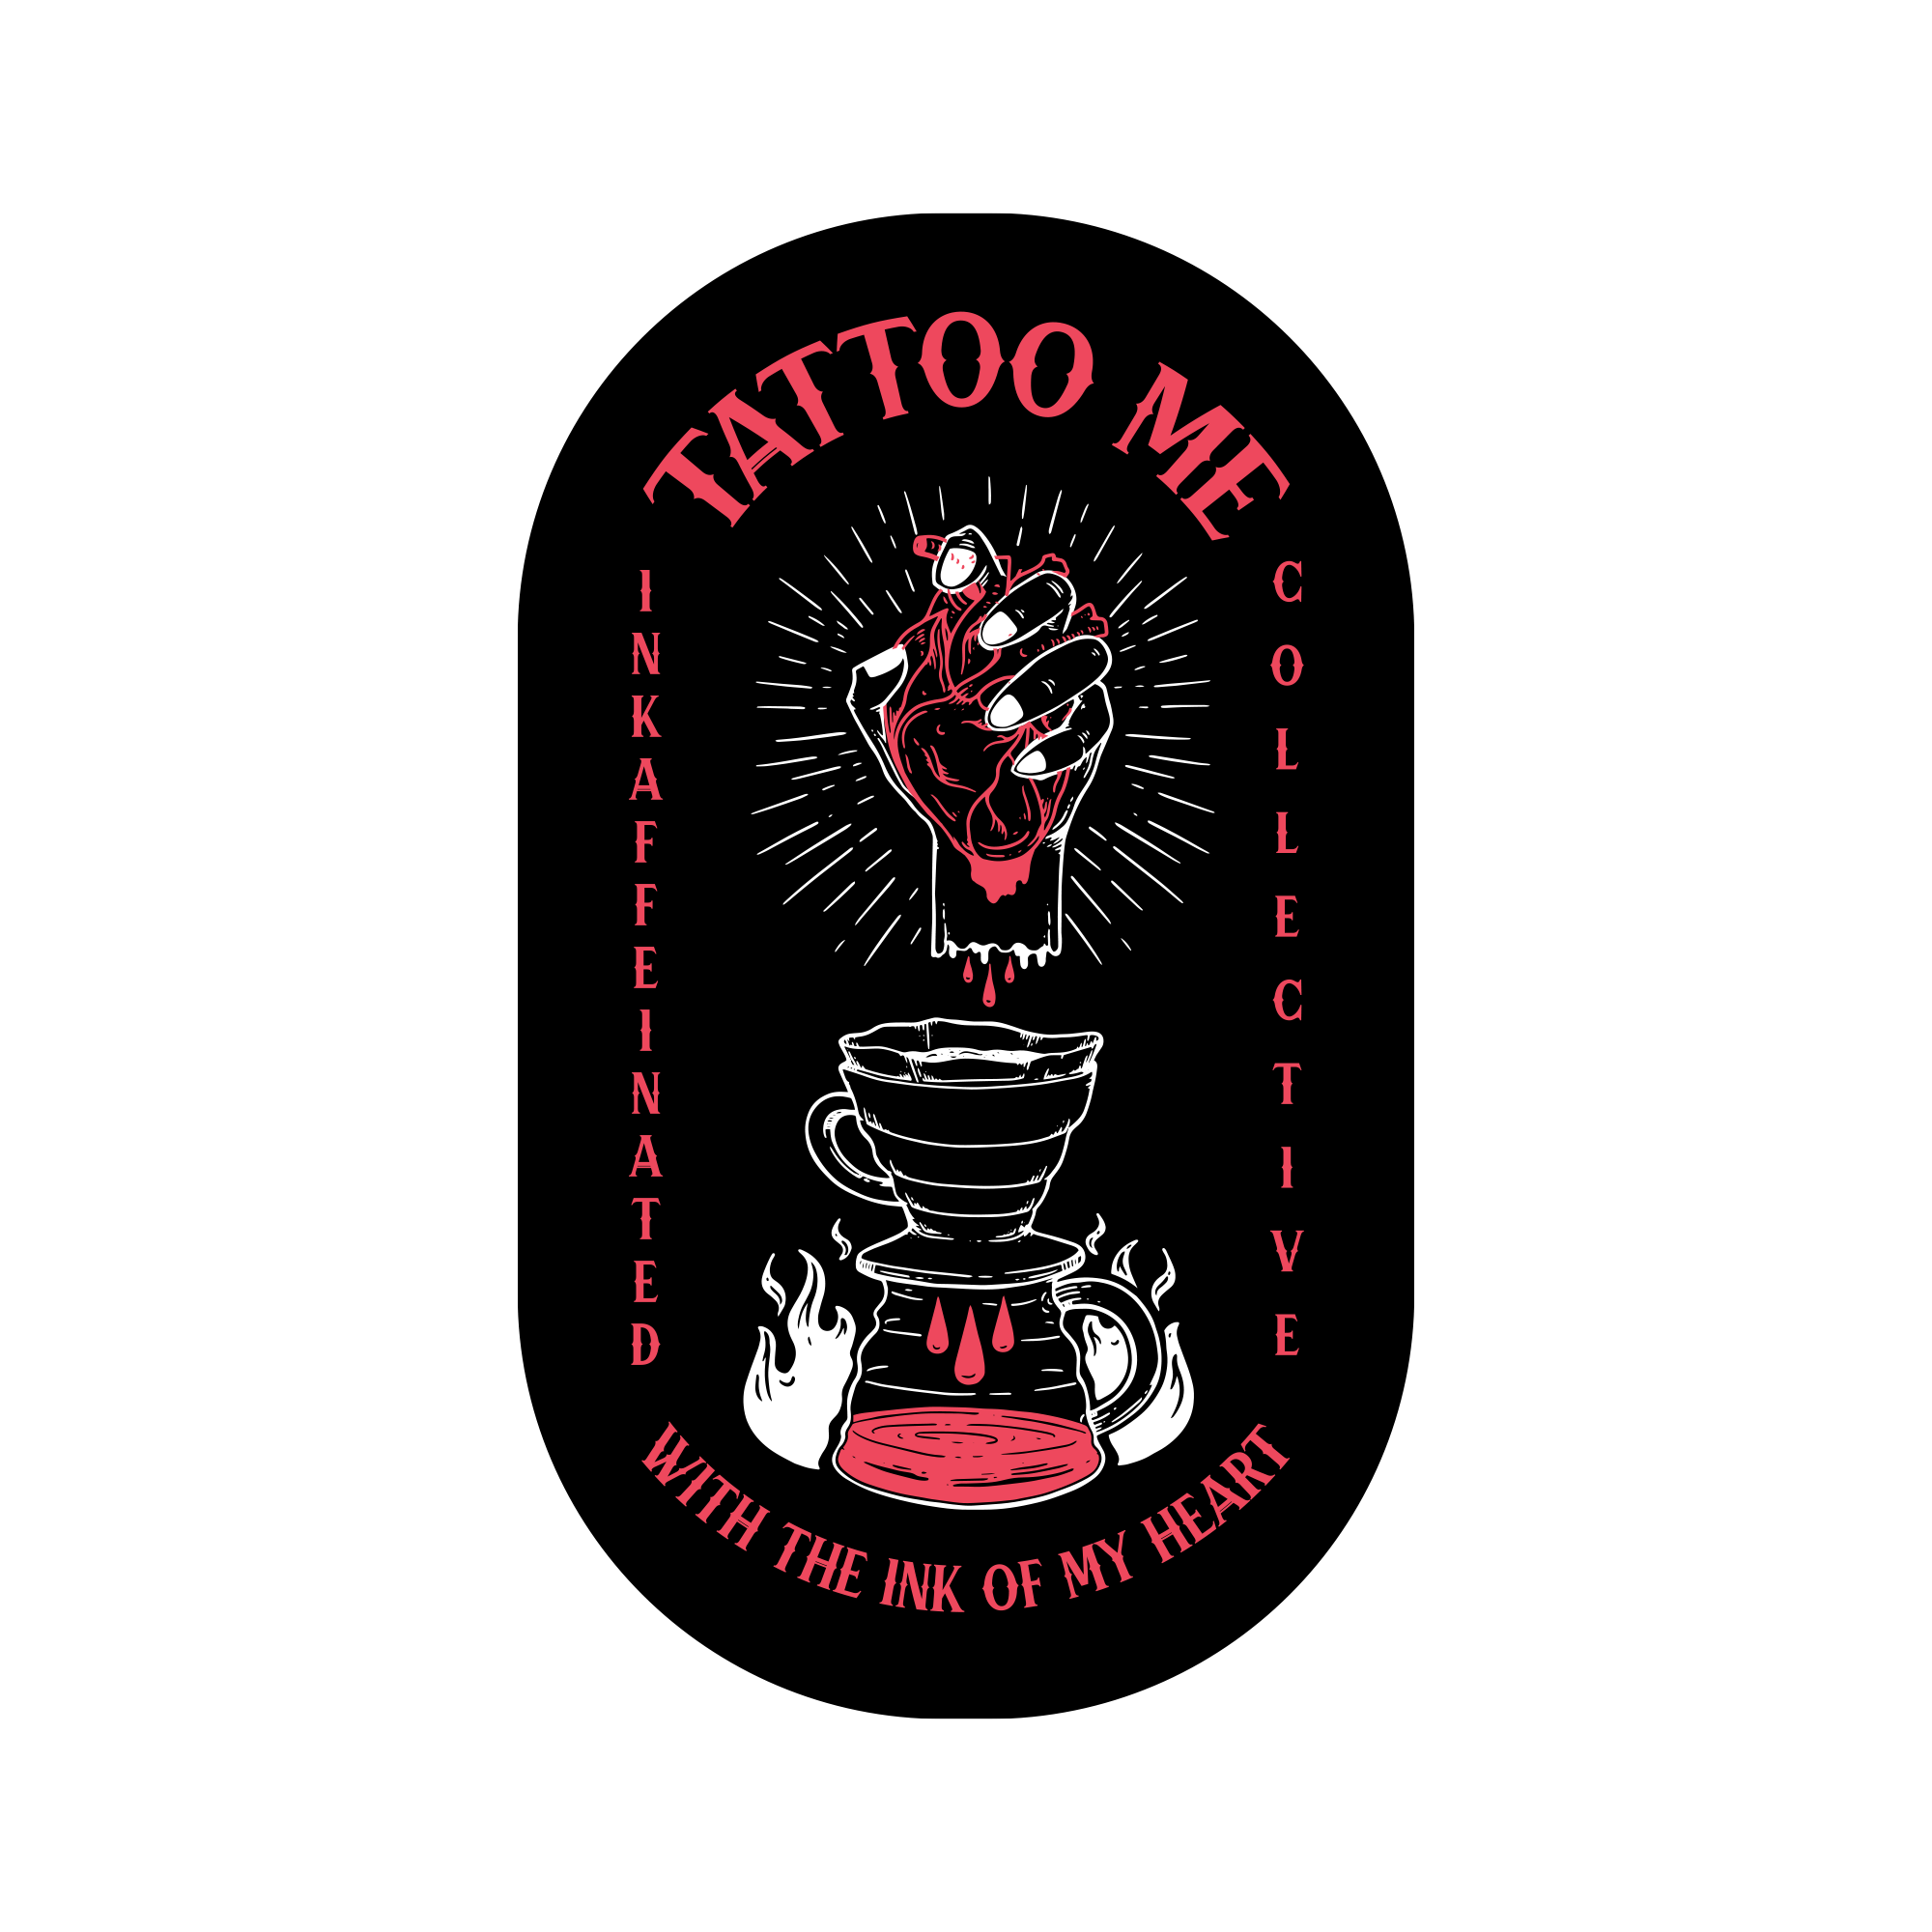 3 " Tattoo Me Sticker FREE WITH PURCHASE